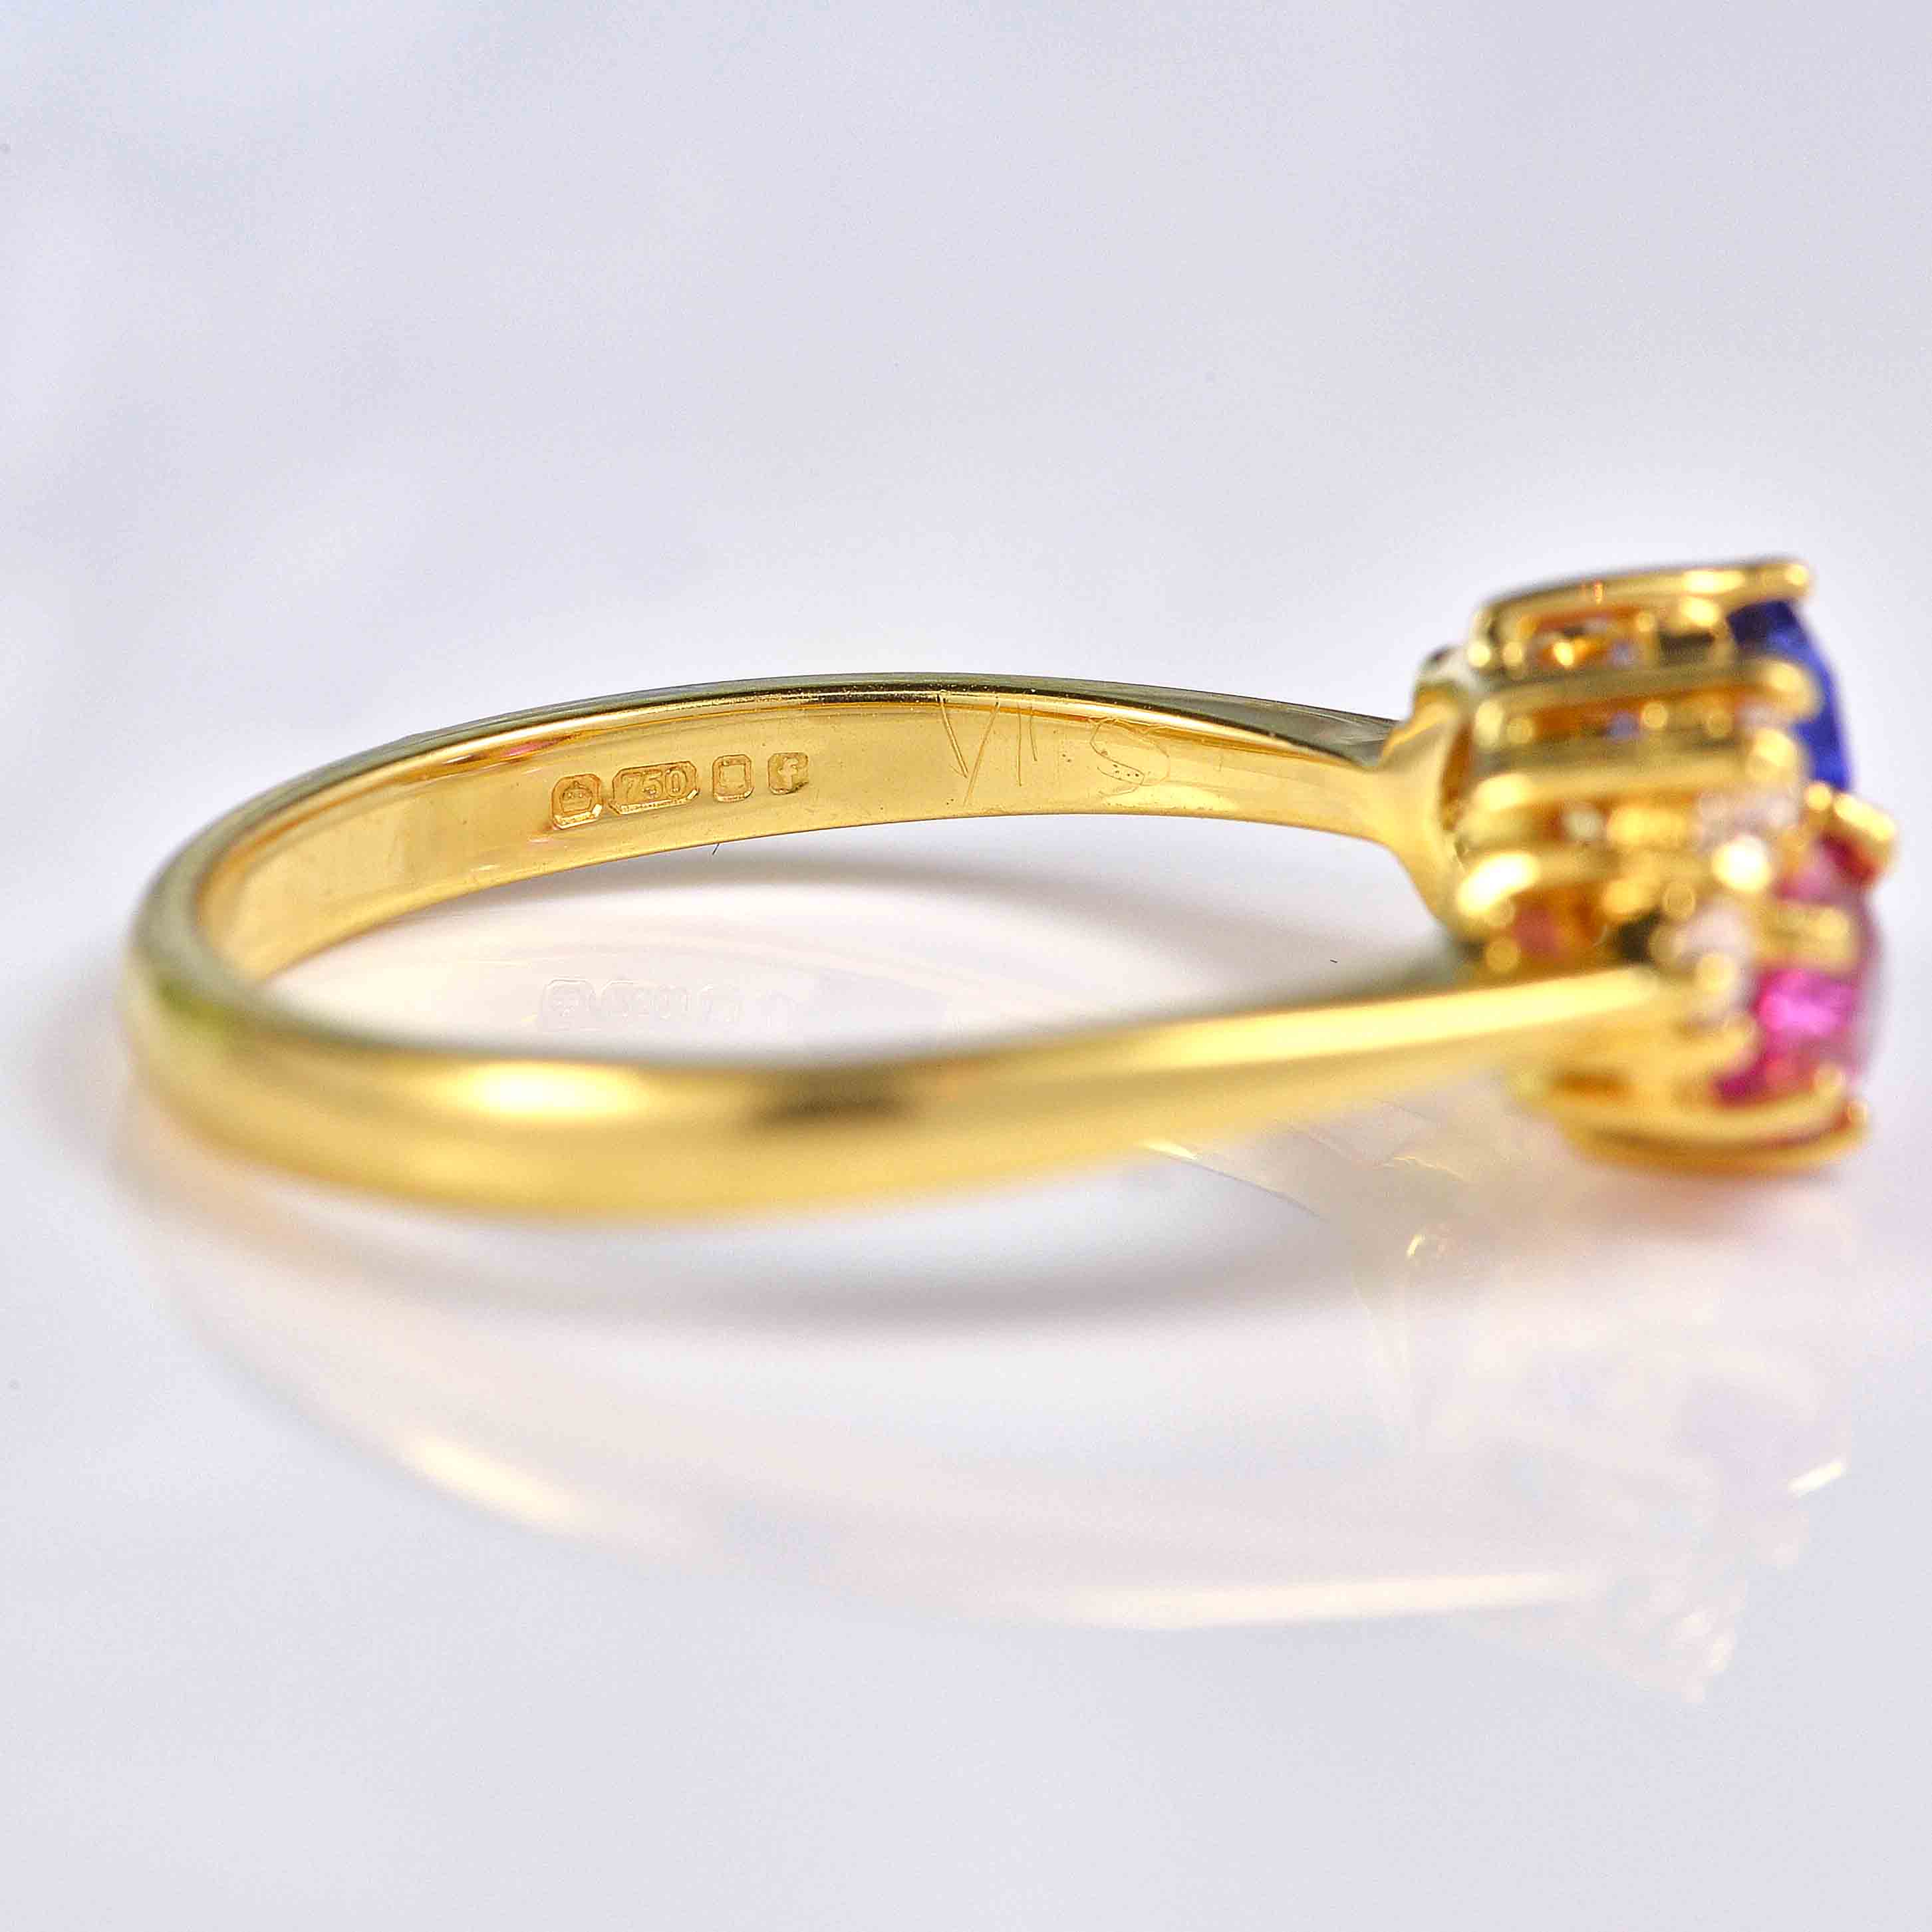 Ellibelle Jewellery Pink Sapphire & Tanzanite 18ct Gold "Toi et Moi" Engagement Ring